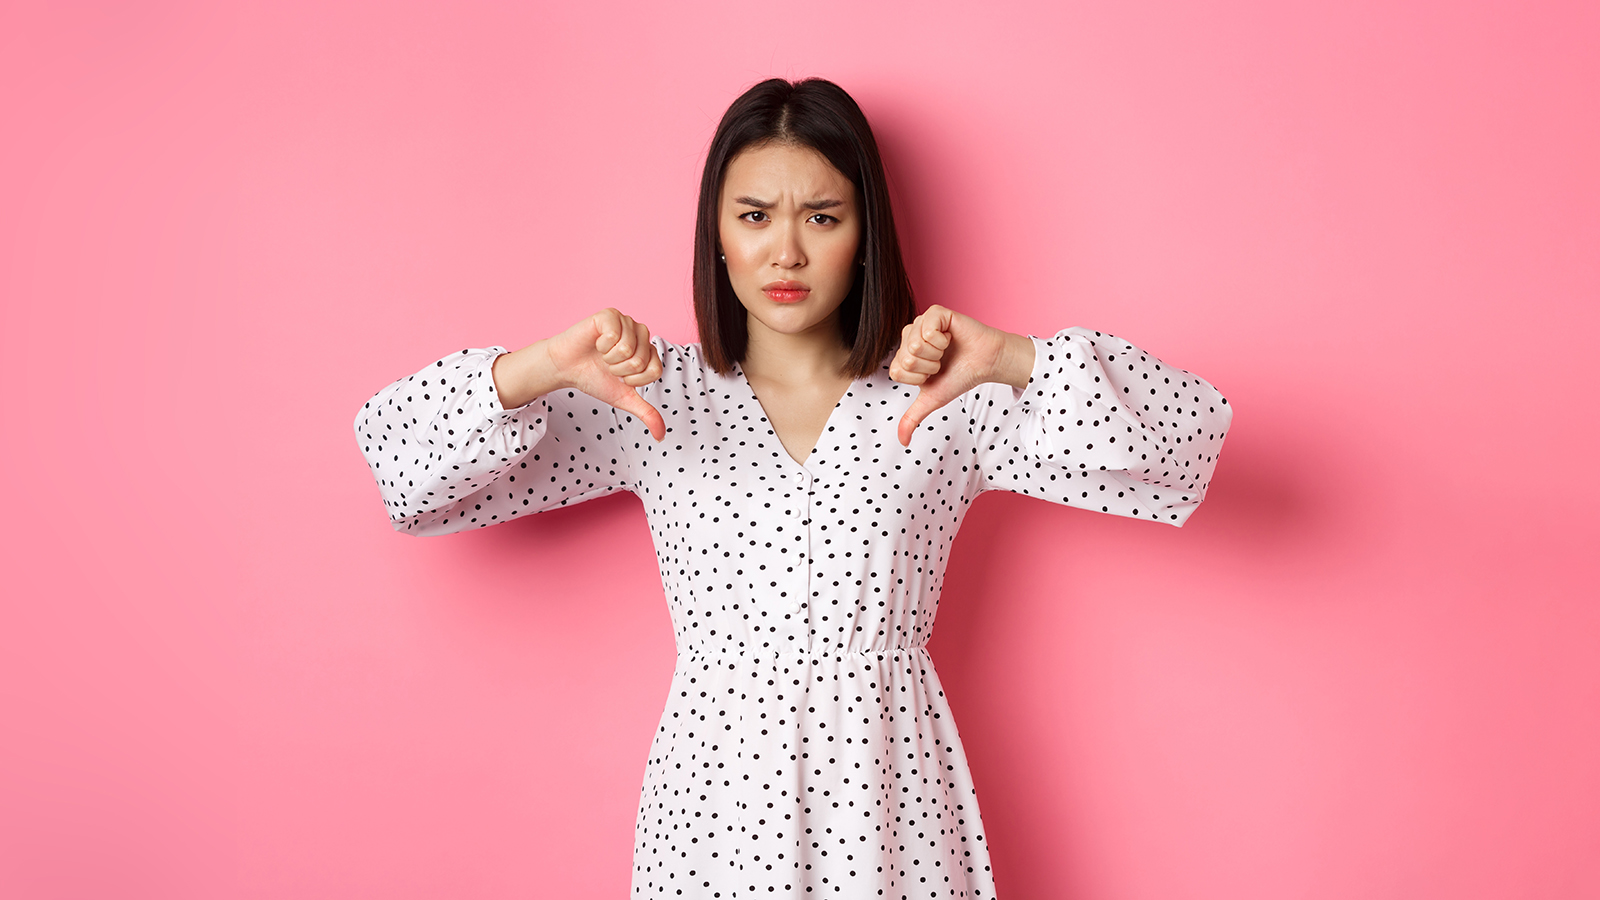 Disappointed asian woman showing thumbs-down, disapprove and dislike something, showing negative judgement, standing over pink background.